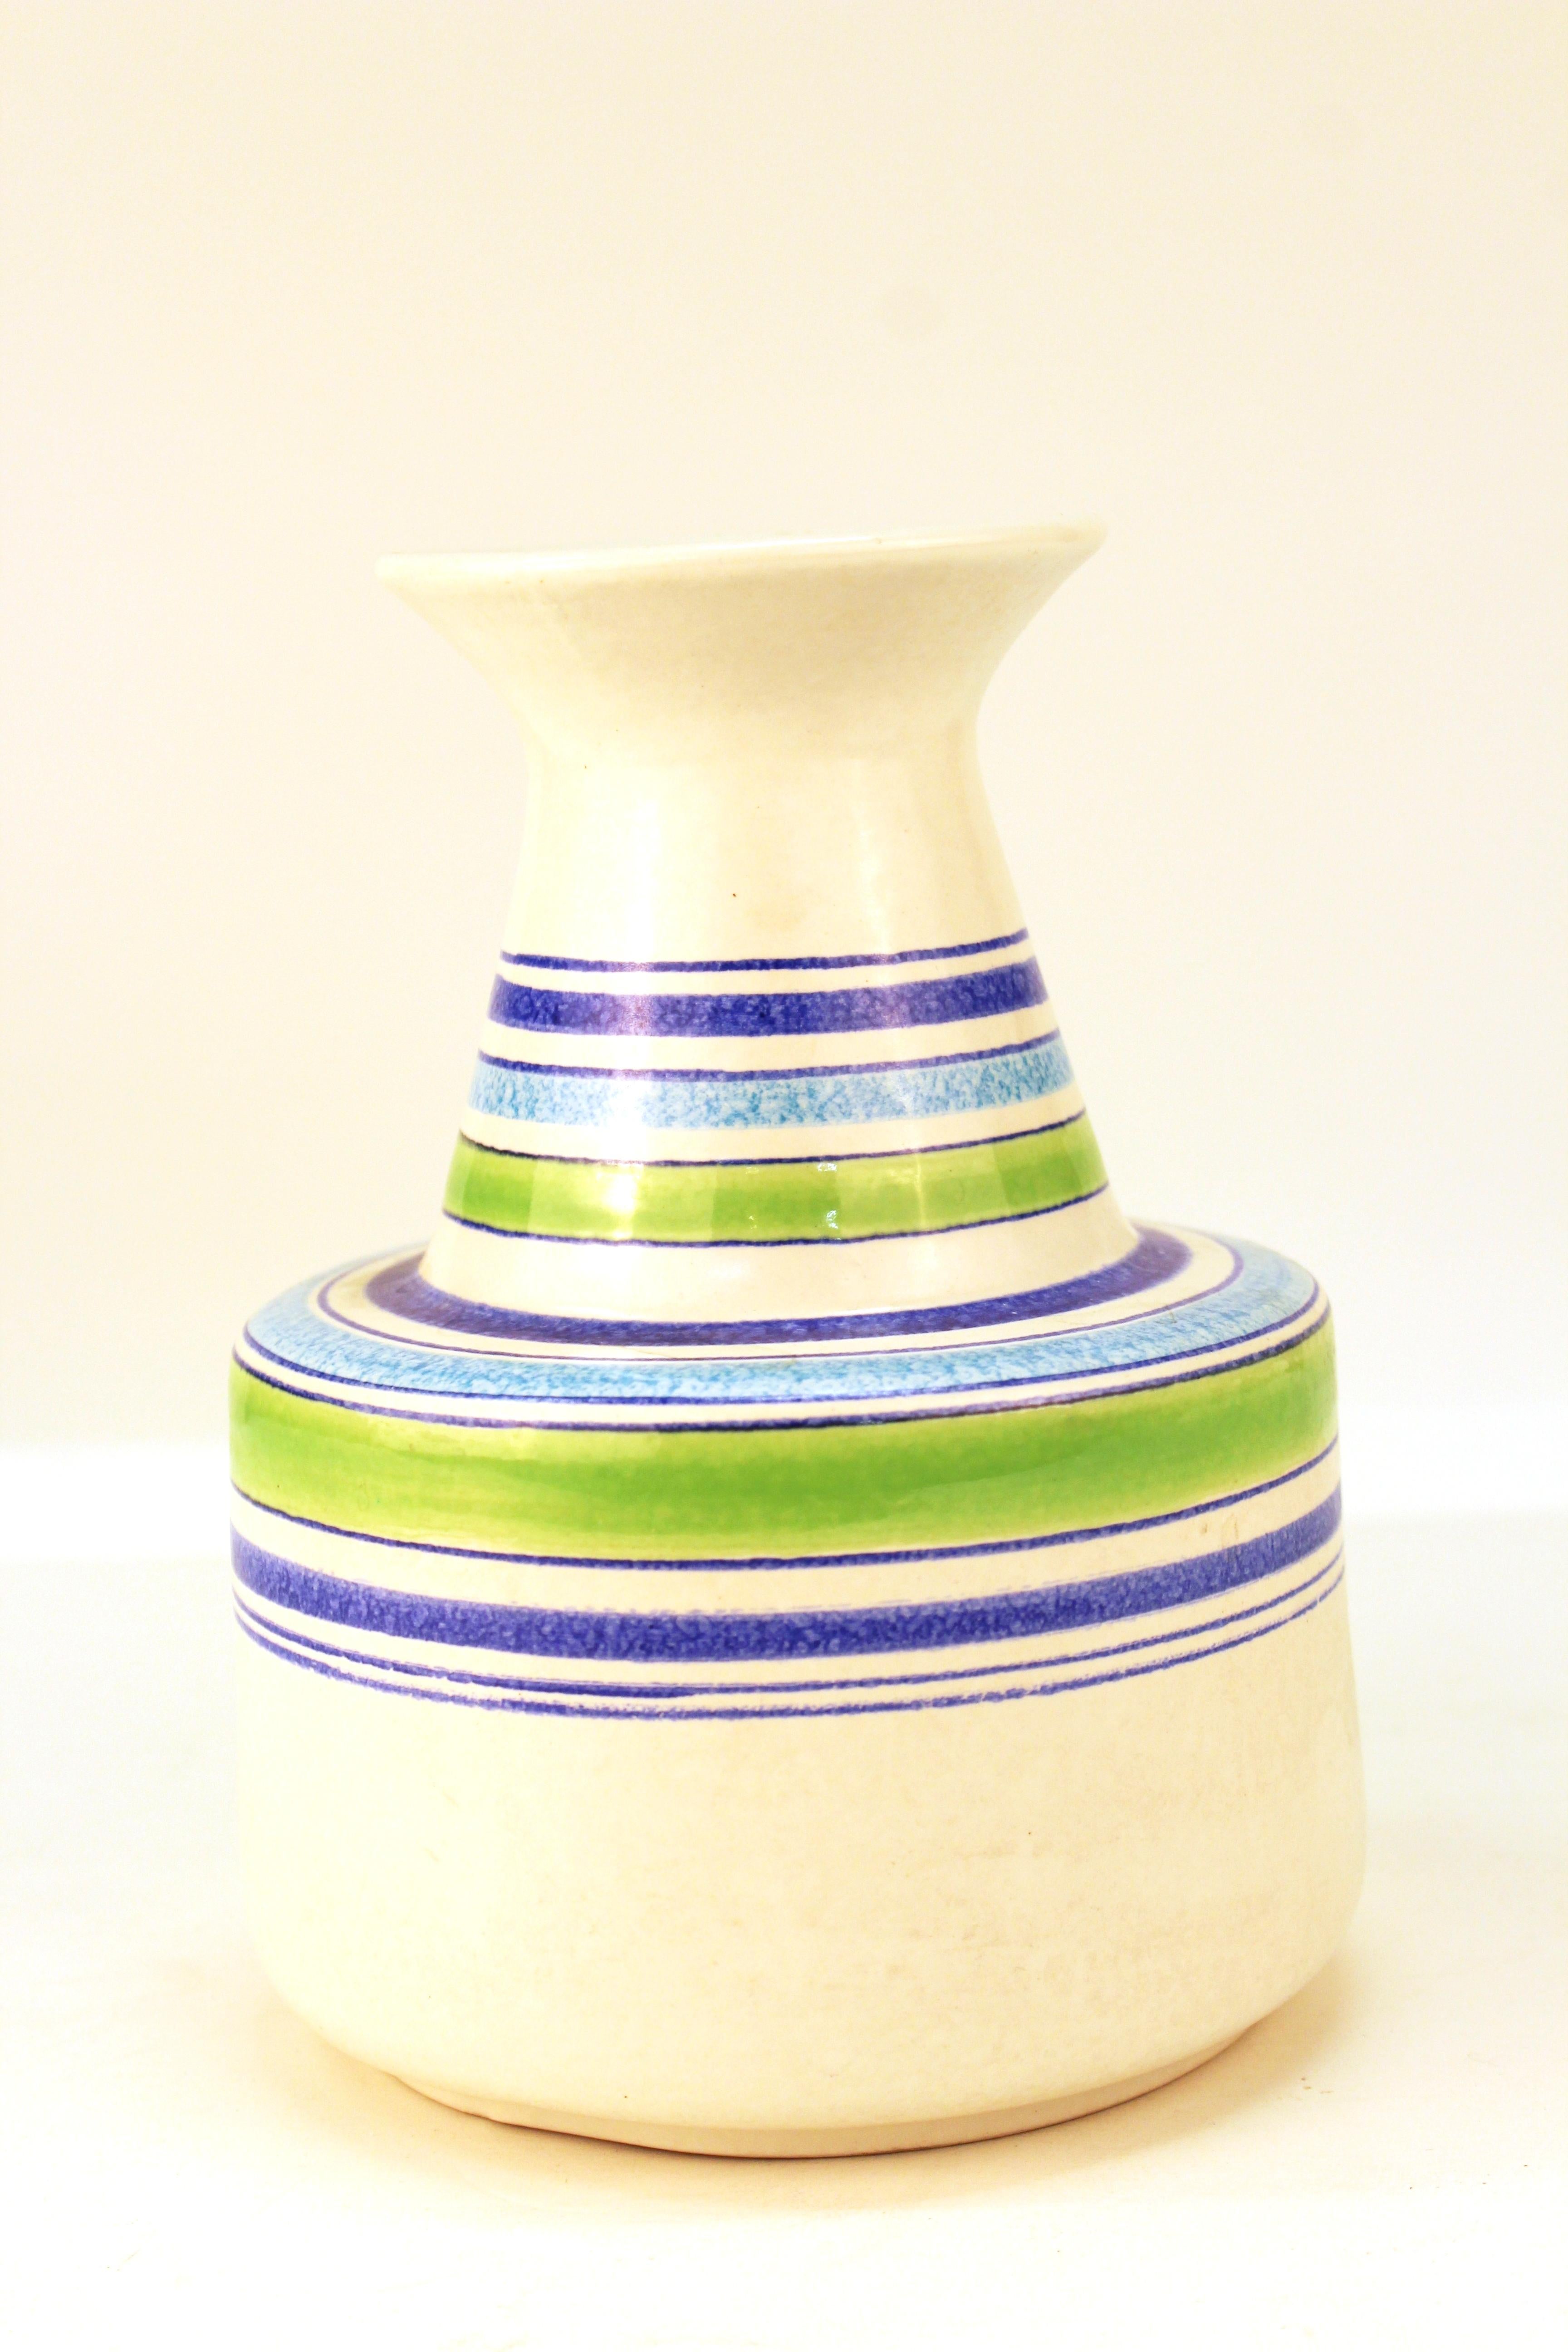 Mid-Century Modern ceramic vase with striped multi-color design, made by Aldo Londi for Raymor for Bitossi Rosenthal Netter in Italy in the 1960s. The piece is labeled on the bottom, with a number and is in great vintage condition.